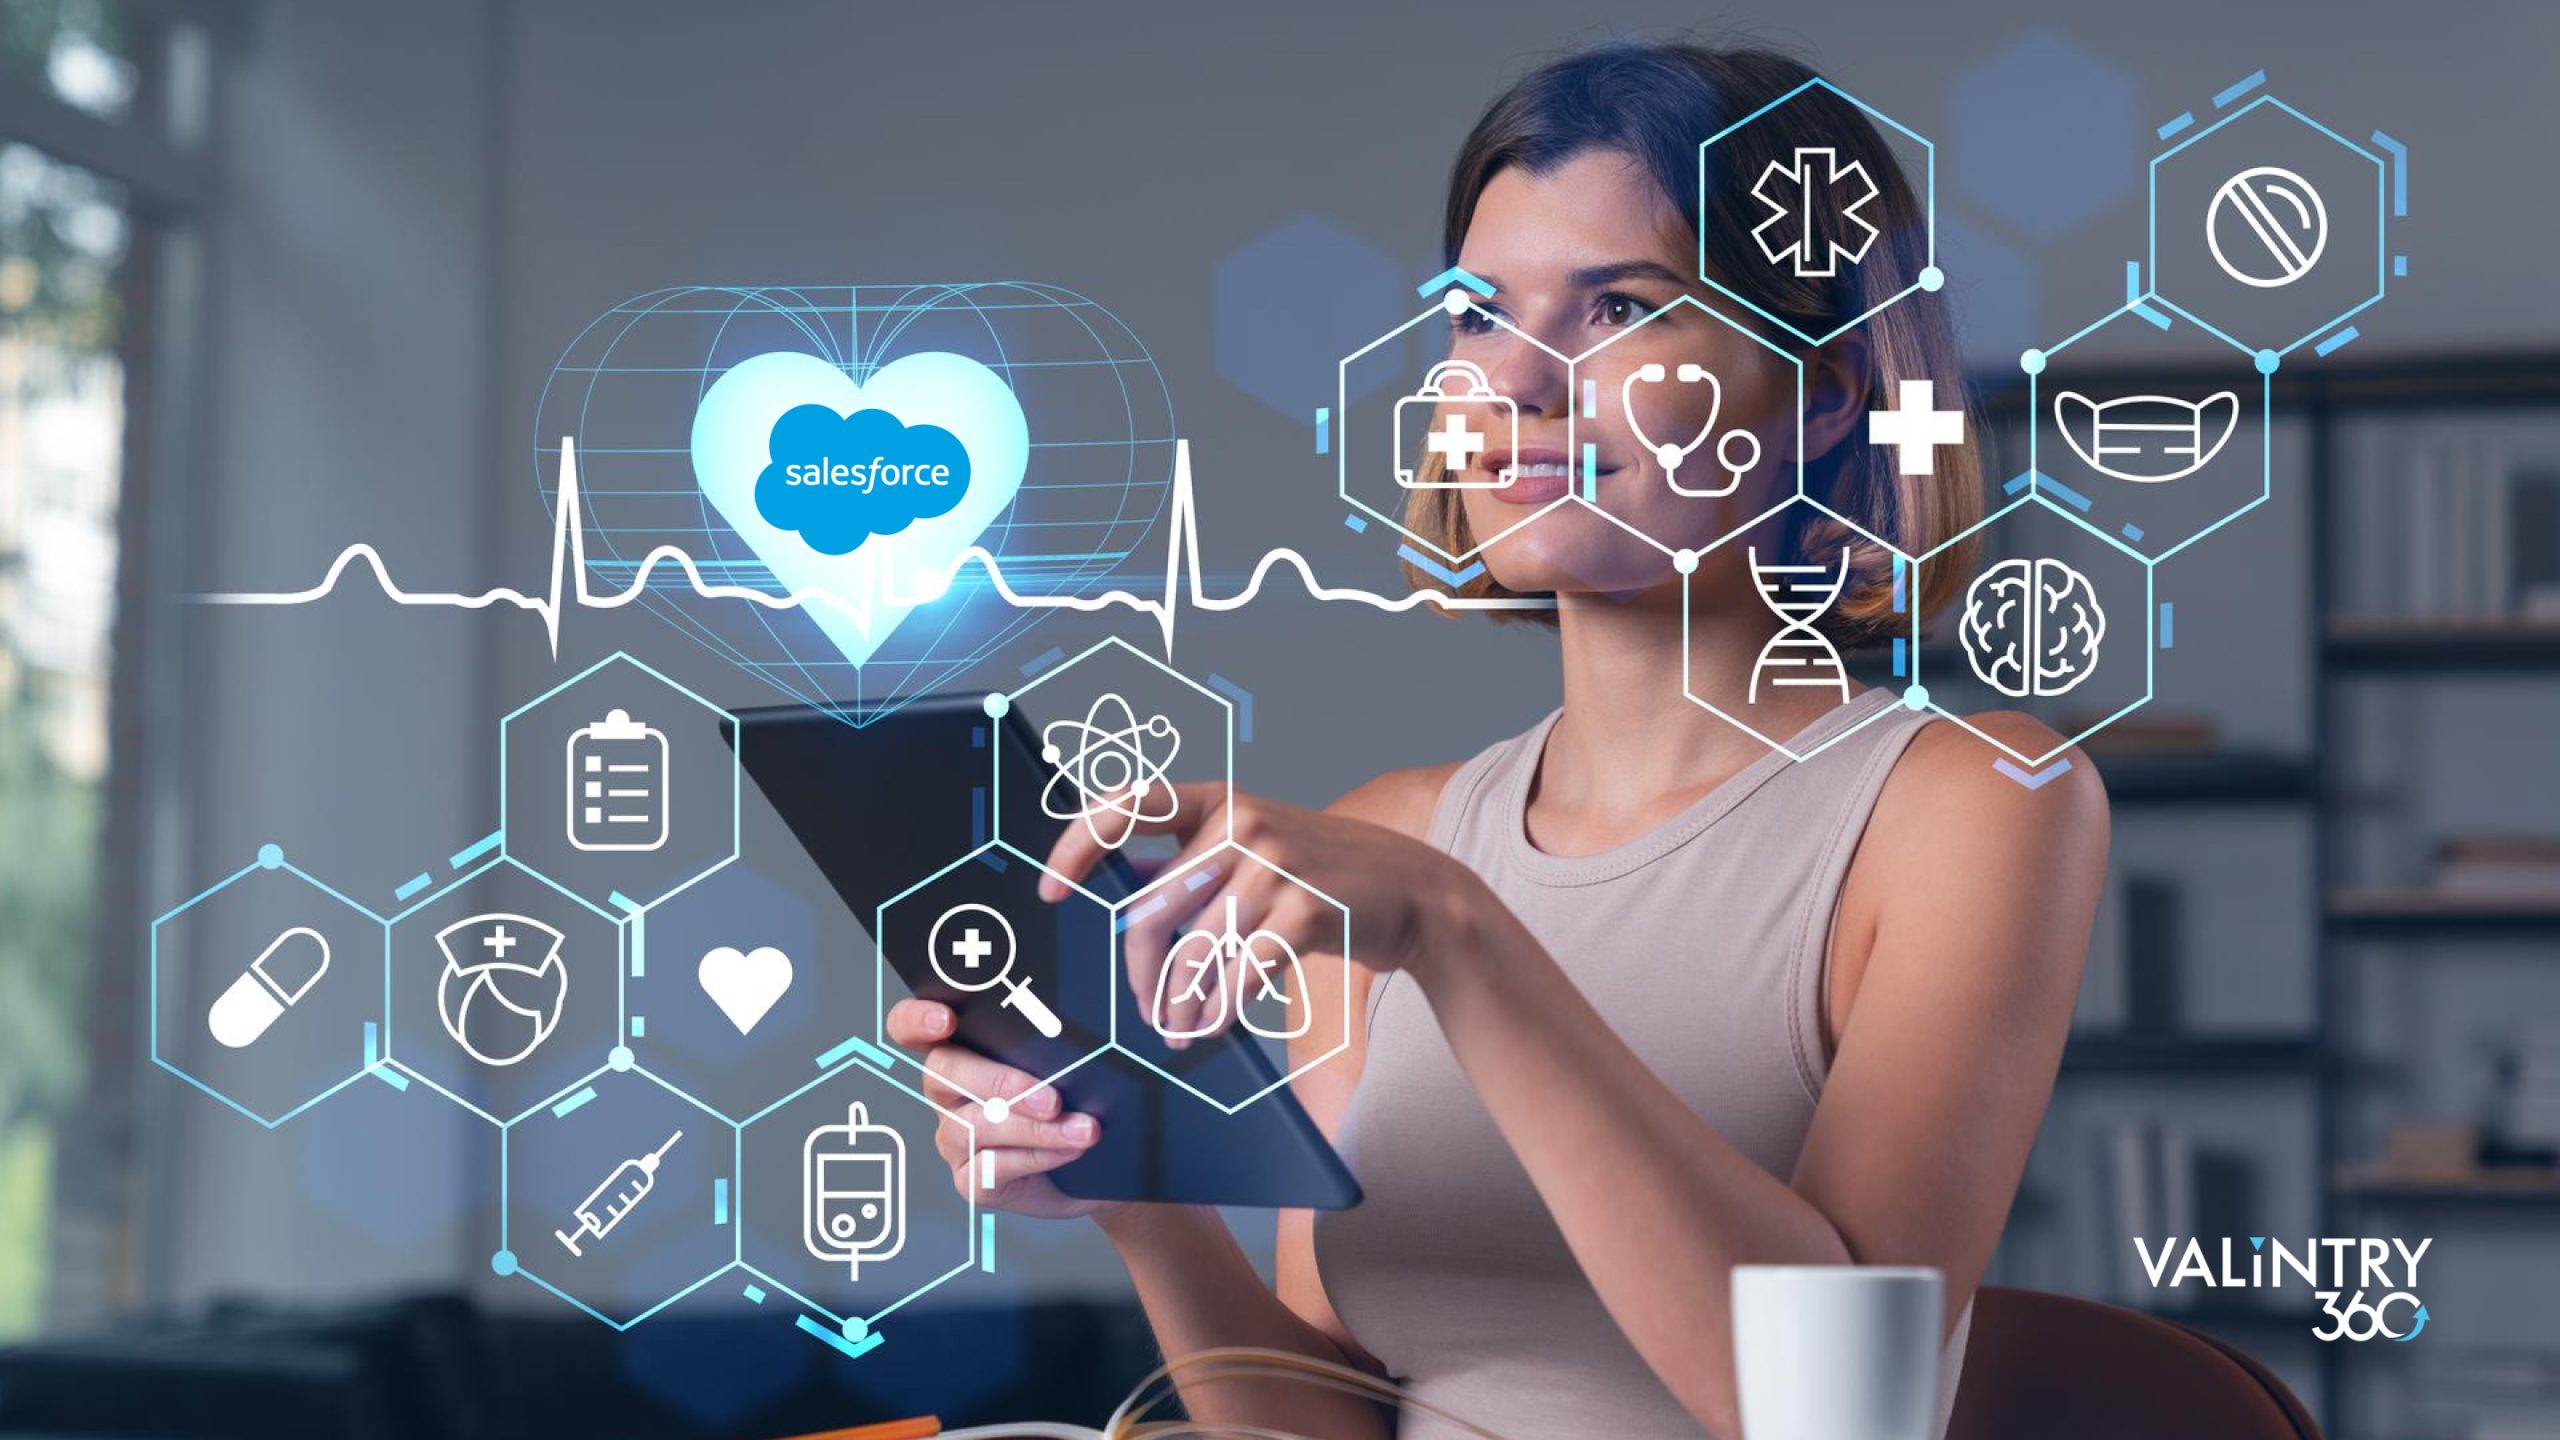 Key Features and Capabilities of Salesforce Health Cloud for Community Health